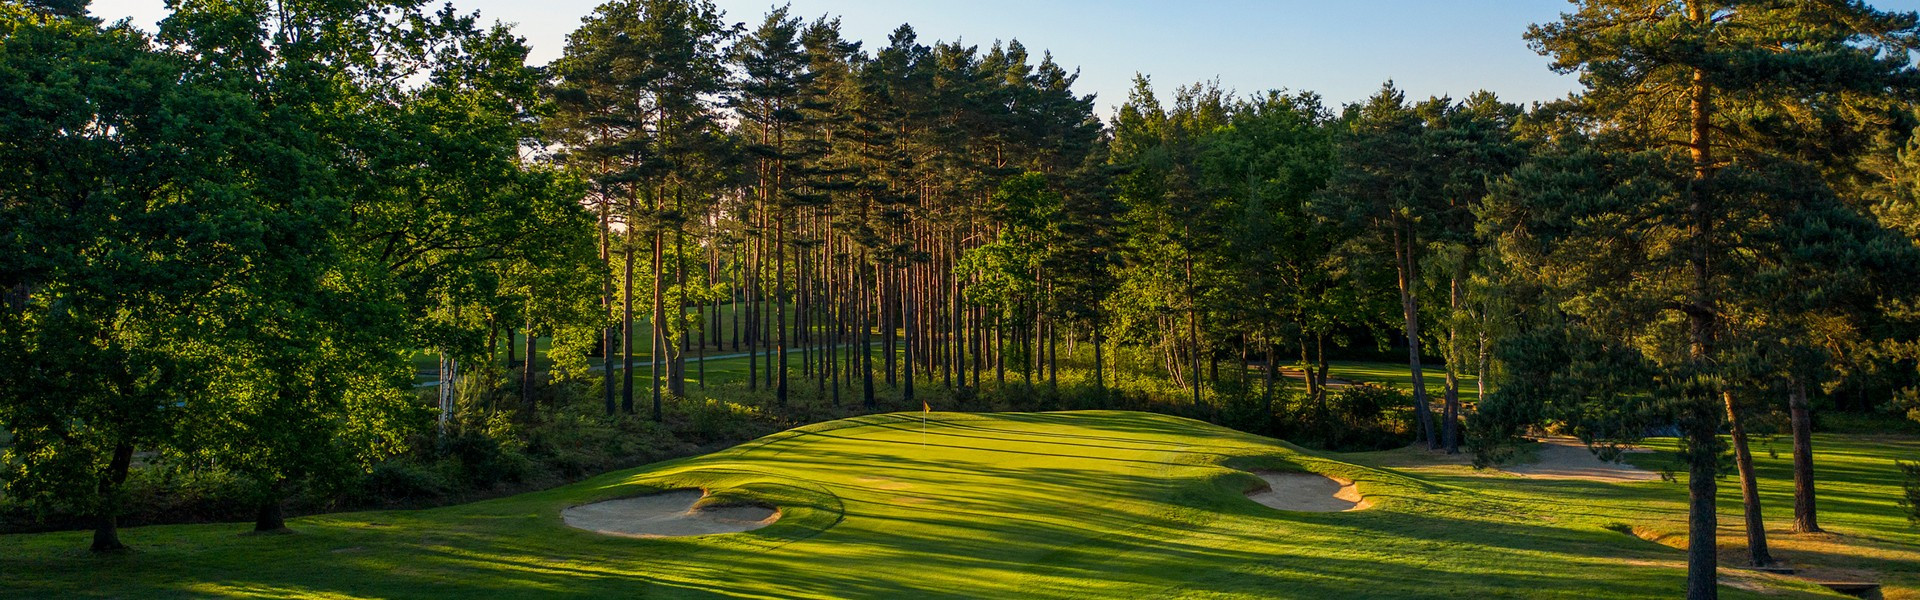 The 2022 PGA Cup is scheduled to be played at Foxhills Club and Resort in England ©Foxhills Club and Resort 